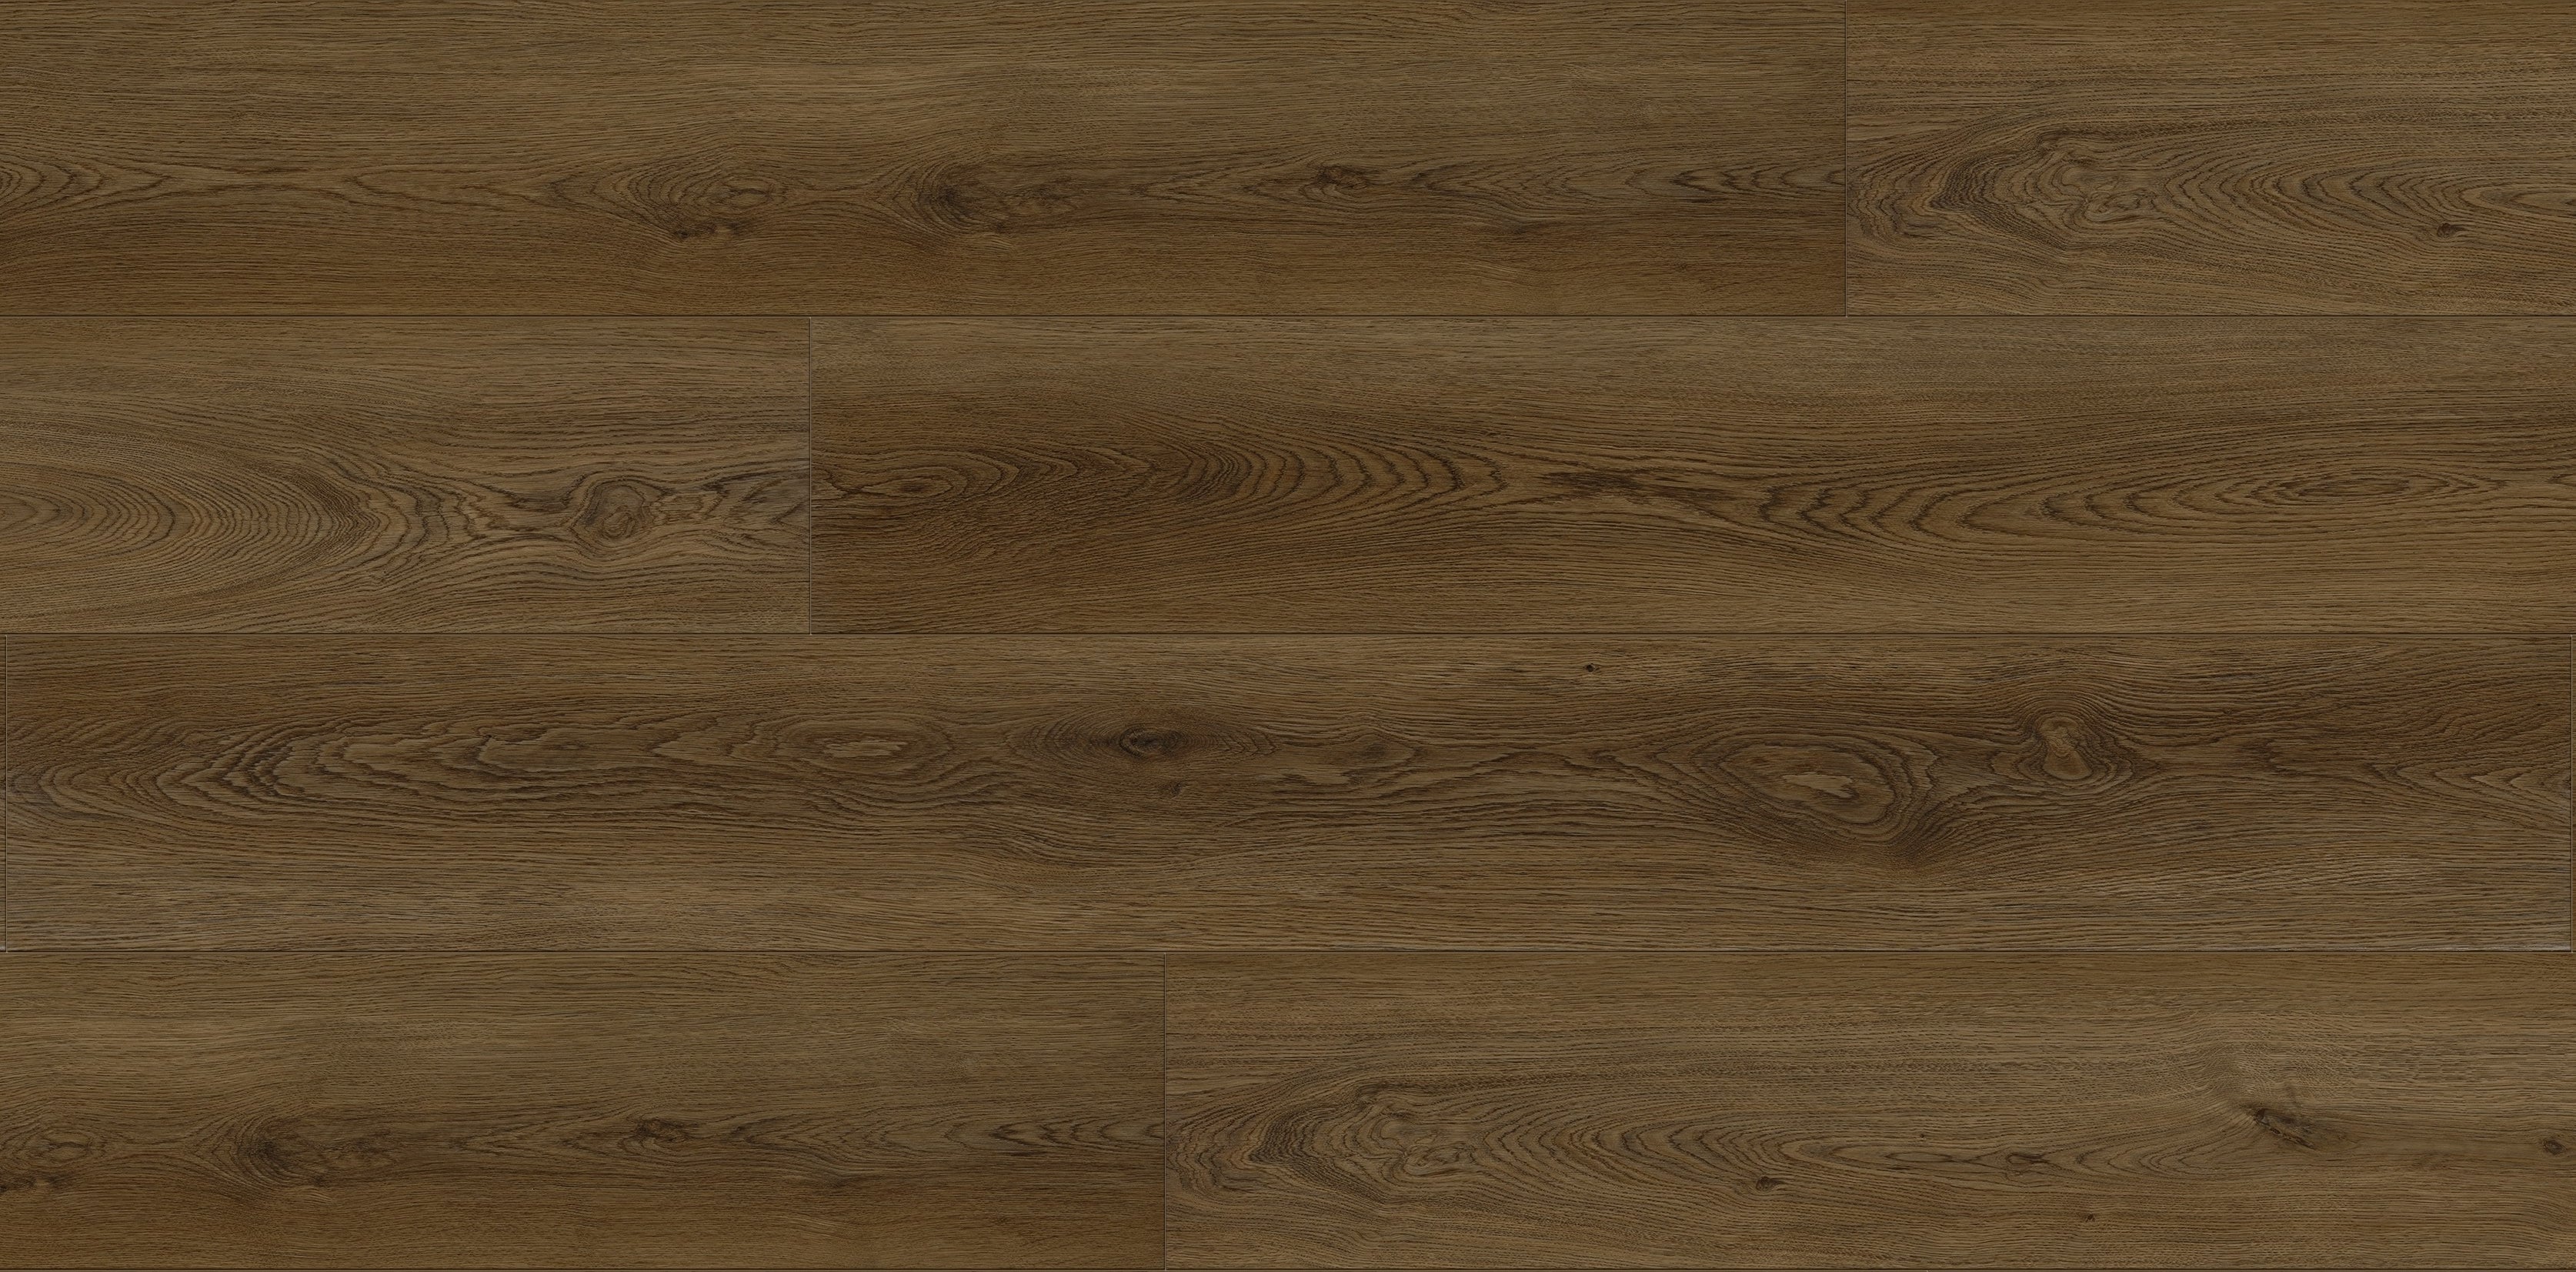 Buckingham Royal Palace Collection 12 3mm Laminate Flooring By